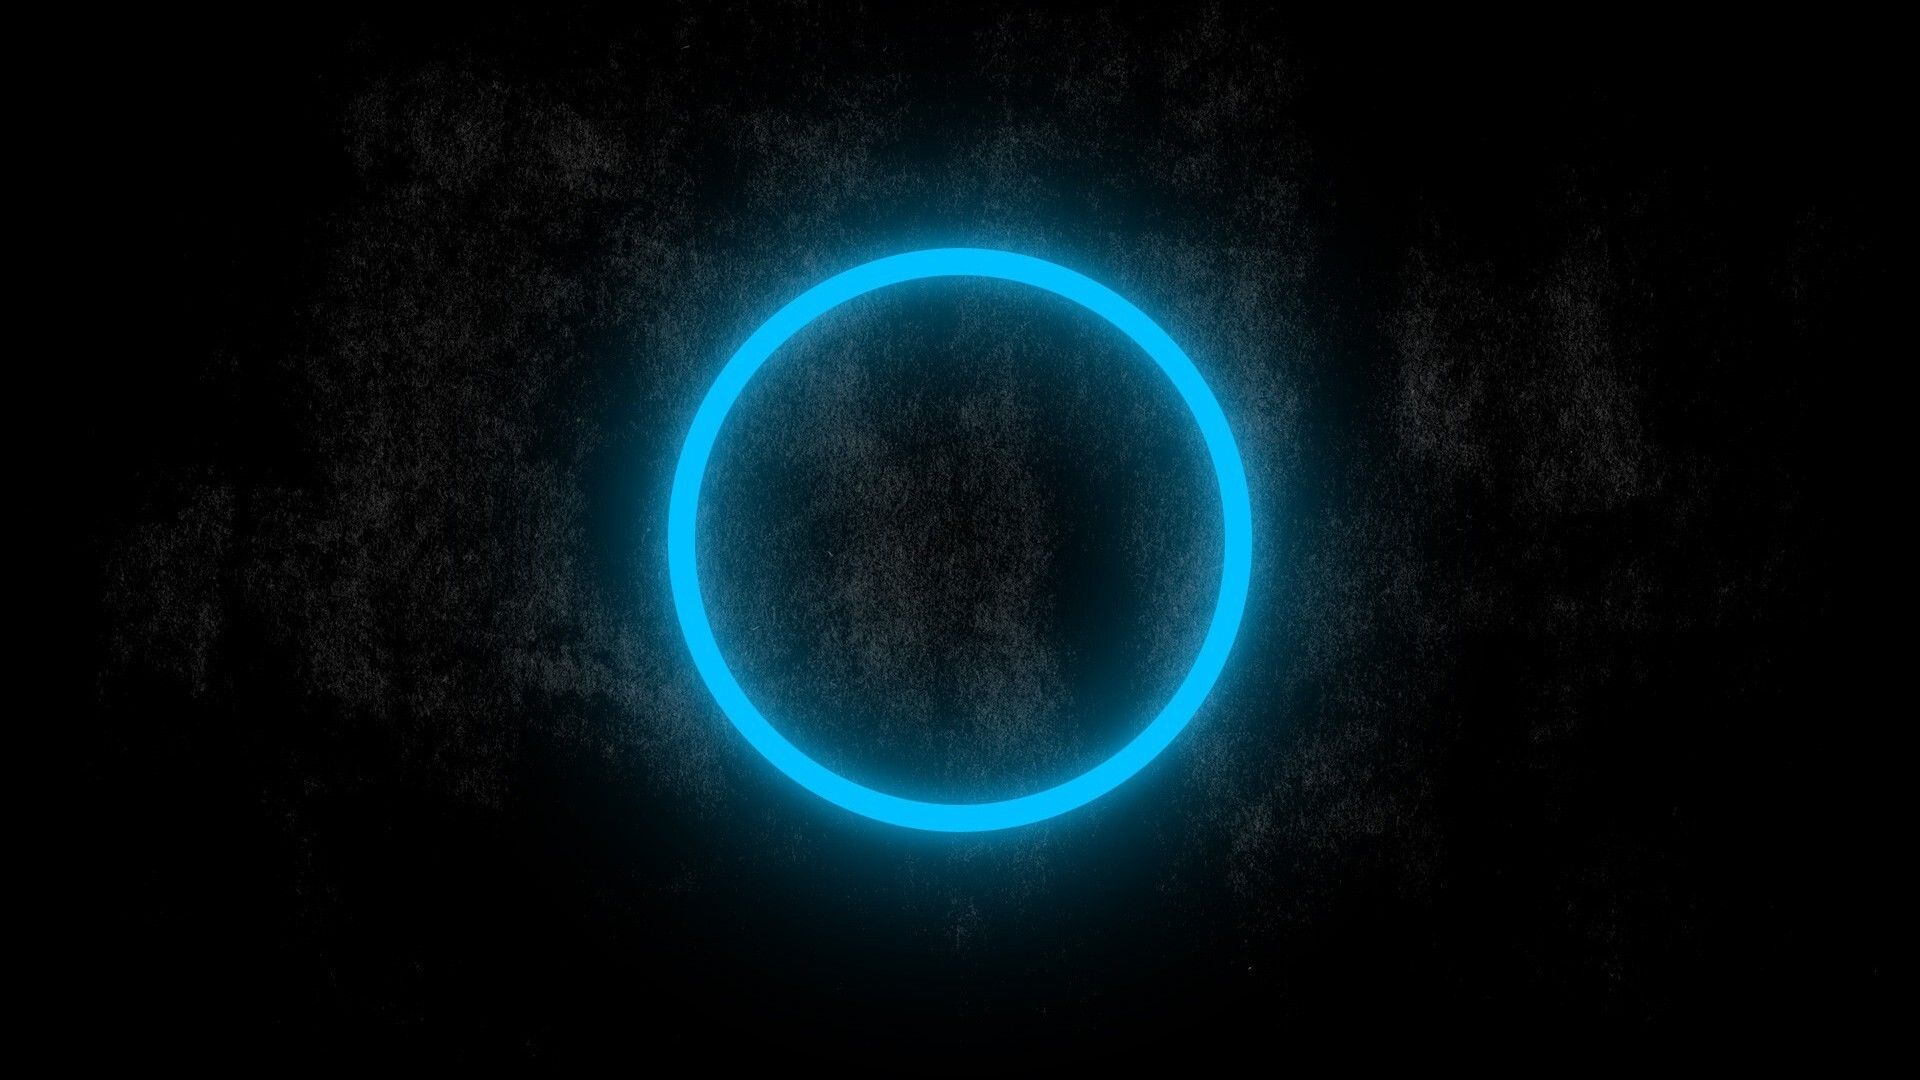 Glow in the Dark: Astronomical object, Neon circle, Art. 1920x1080 Full HD Background.